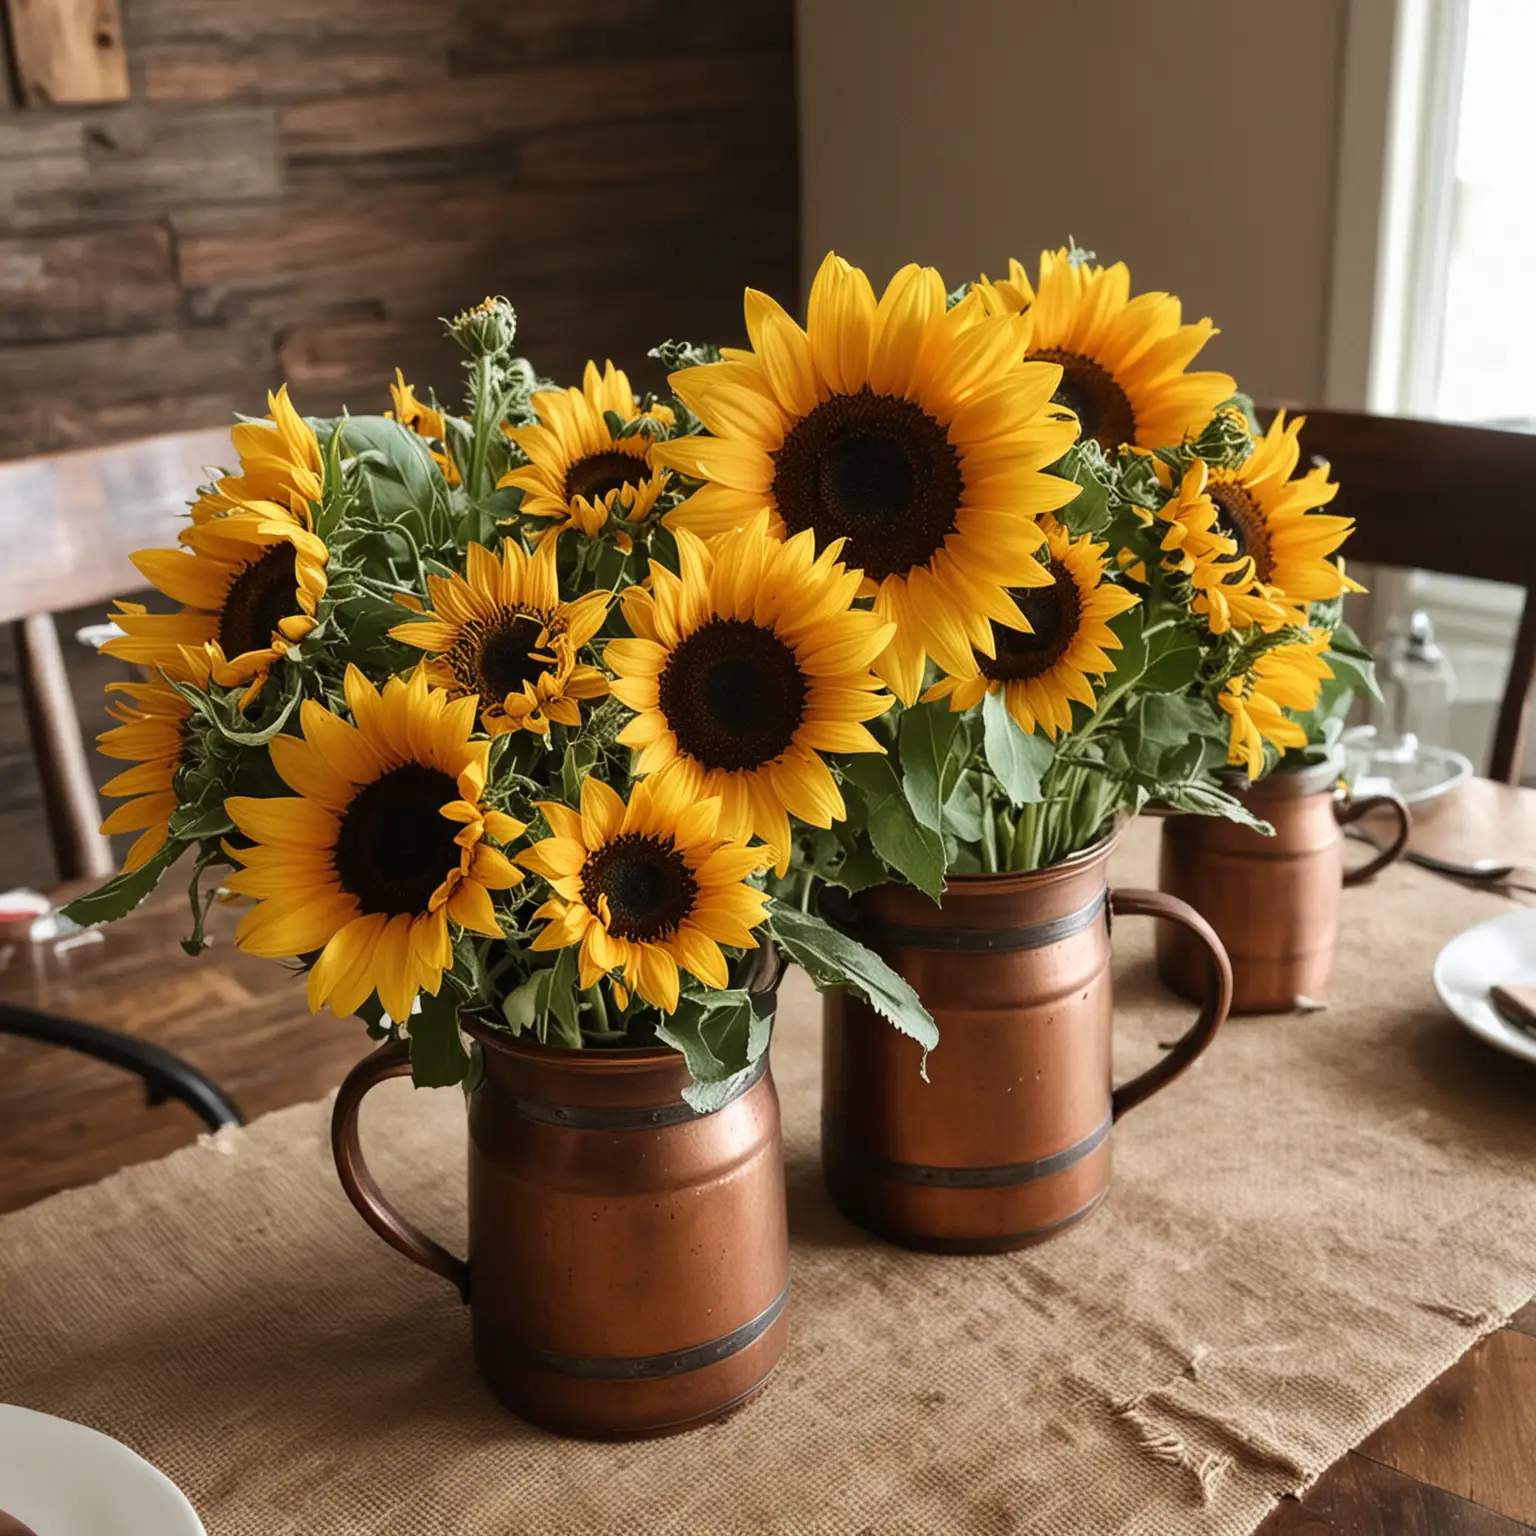 a simple and small rustic centerpiece with sunflowers in rustic copper mugs